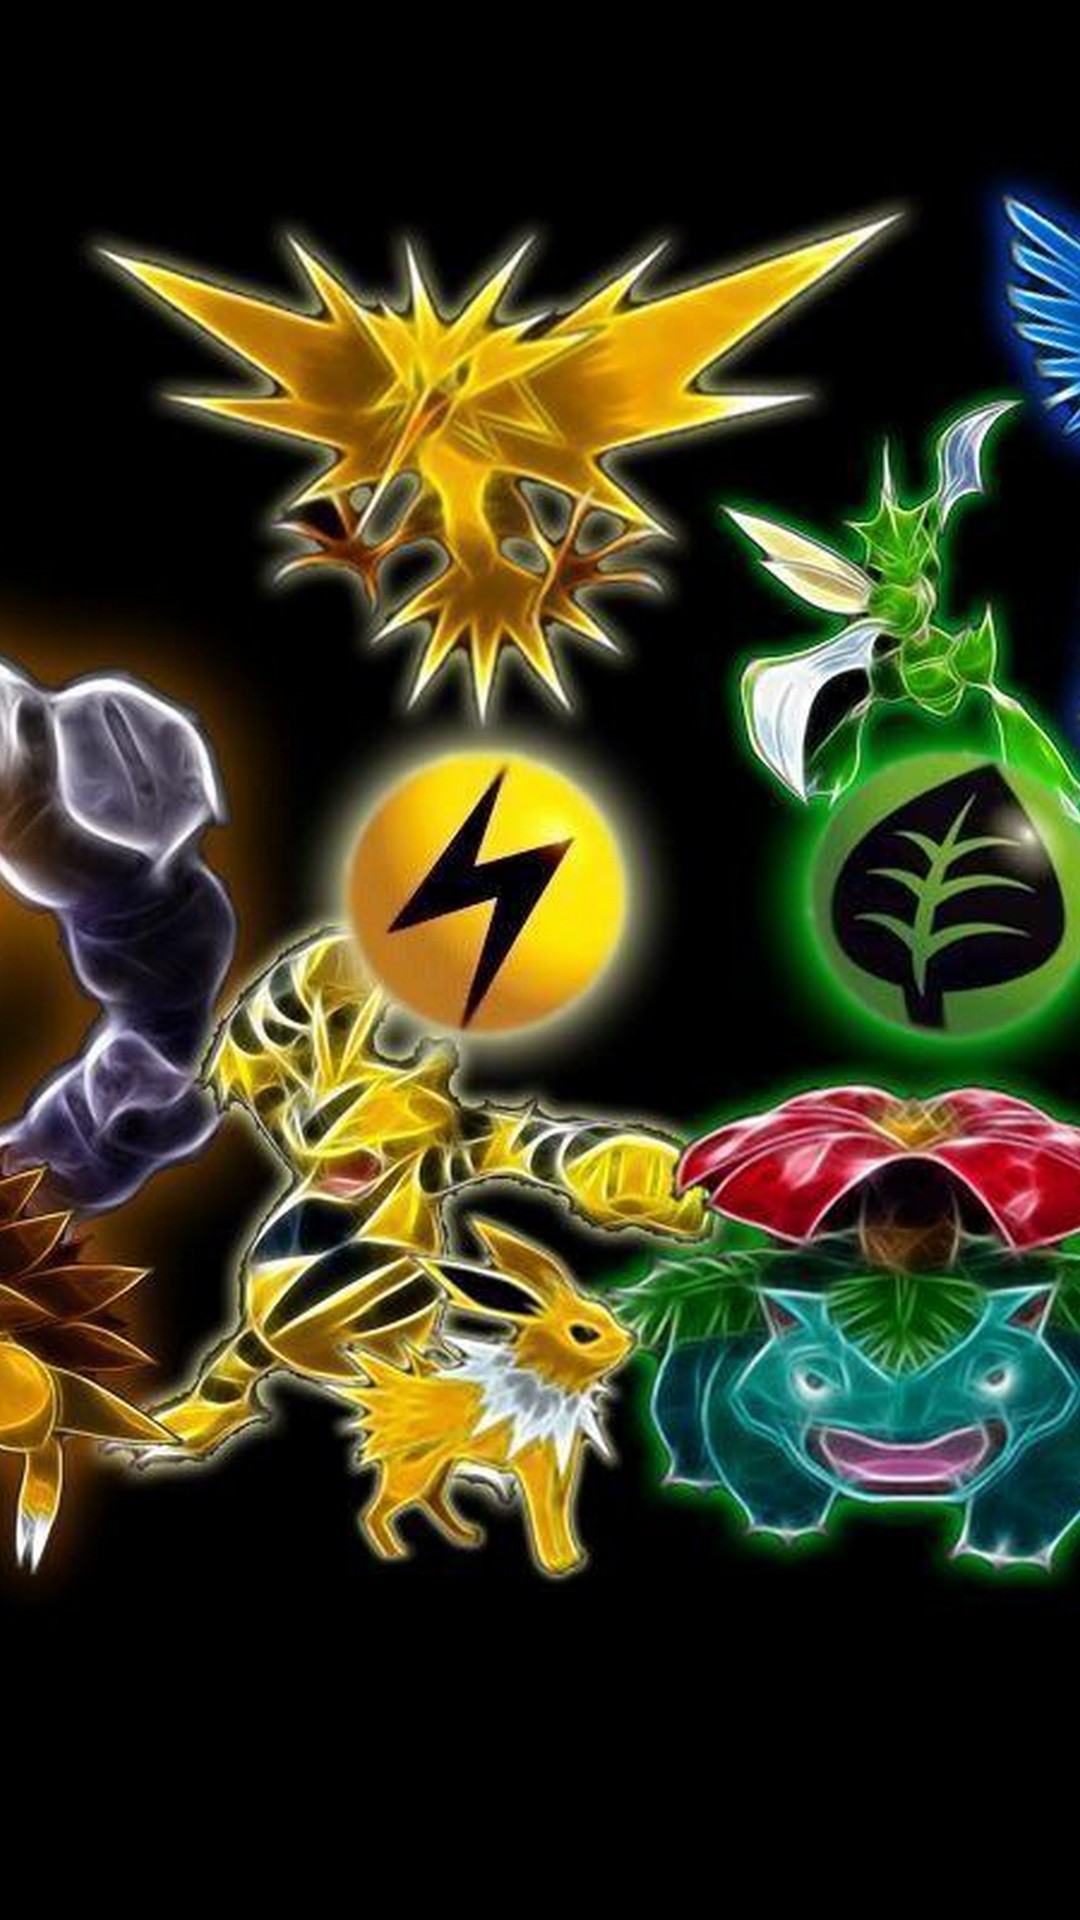 pokemon wallpaper android,organism,fictional character,illustration,plant,graphic design